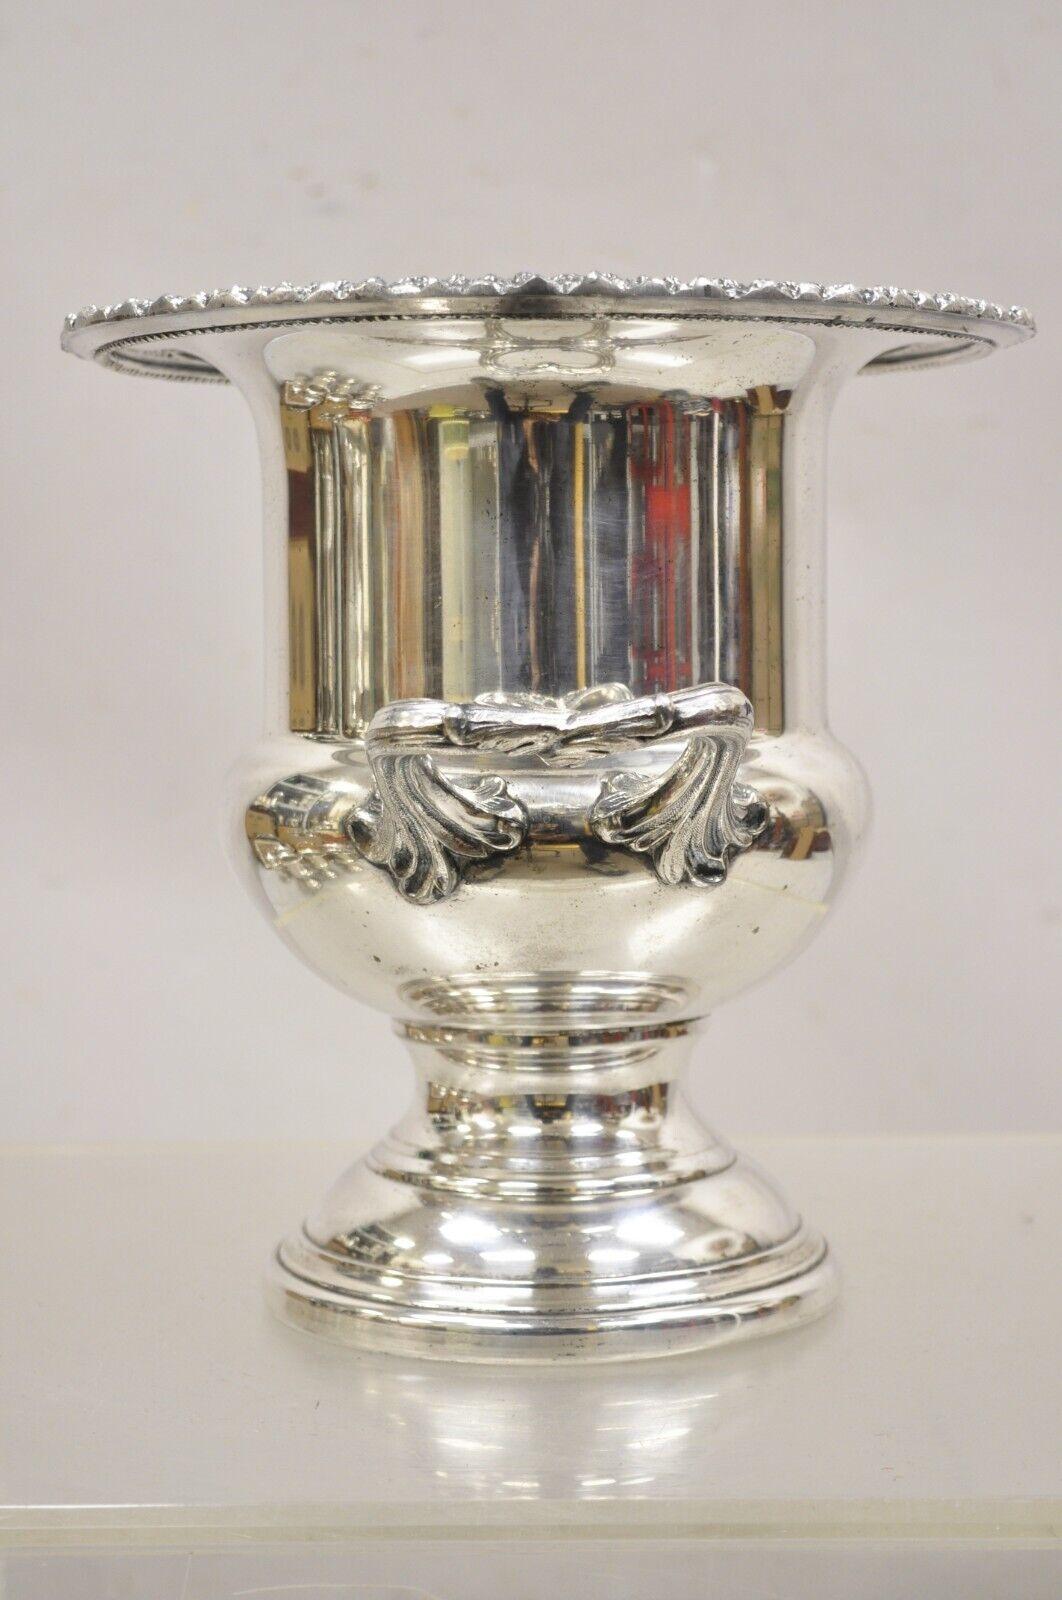 Vintage Eton Silver Plated Twin Handle Trophy Cup Champagne Chiller Ice Bucket. Circa Mid 20th Century. Measurements: 10 